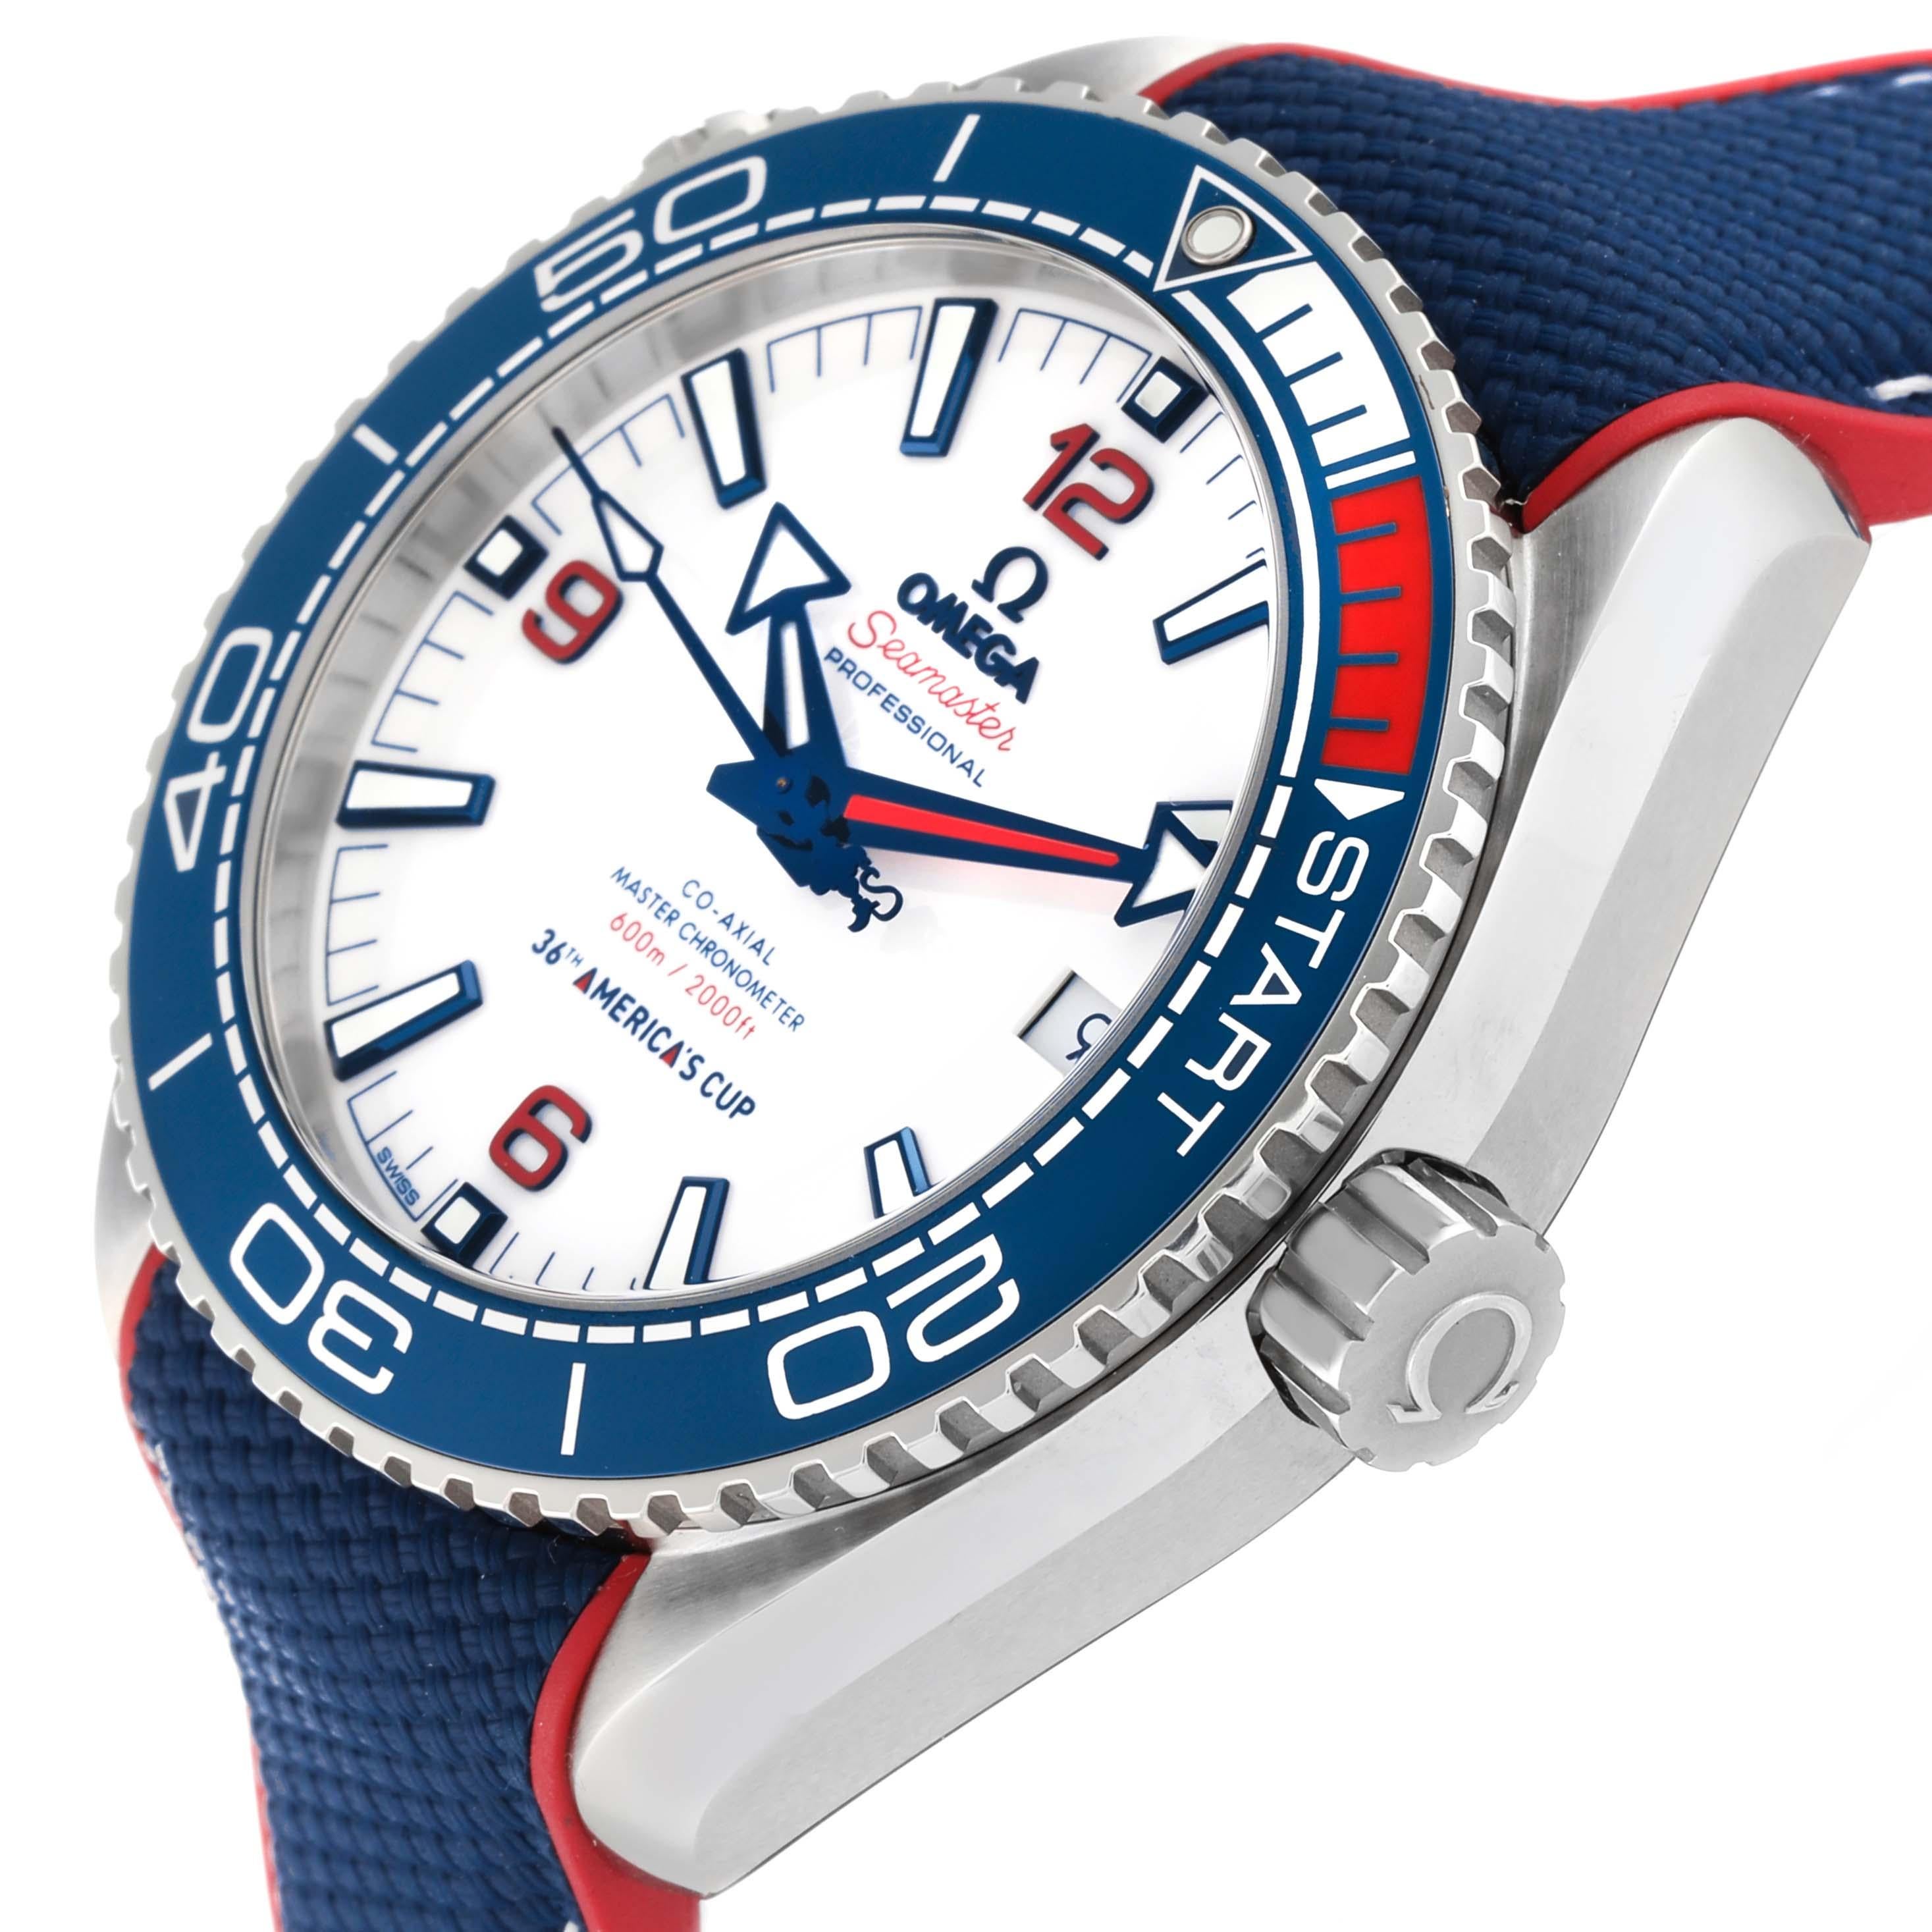 Omega Seamaster Planet Ocean America Cup Limited Edition Watch 2